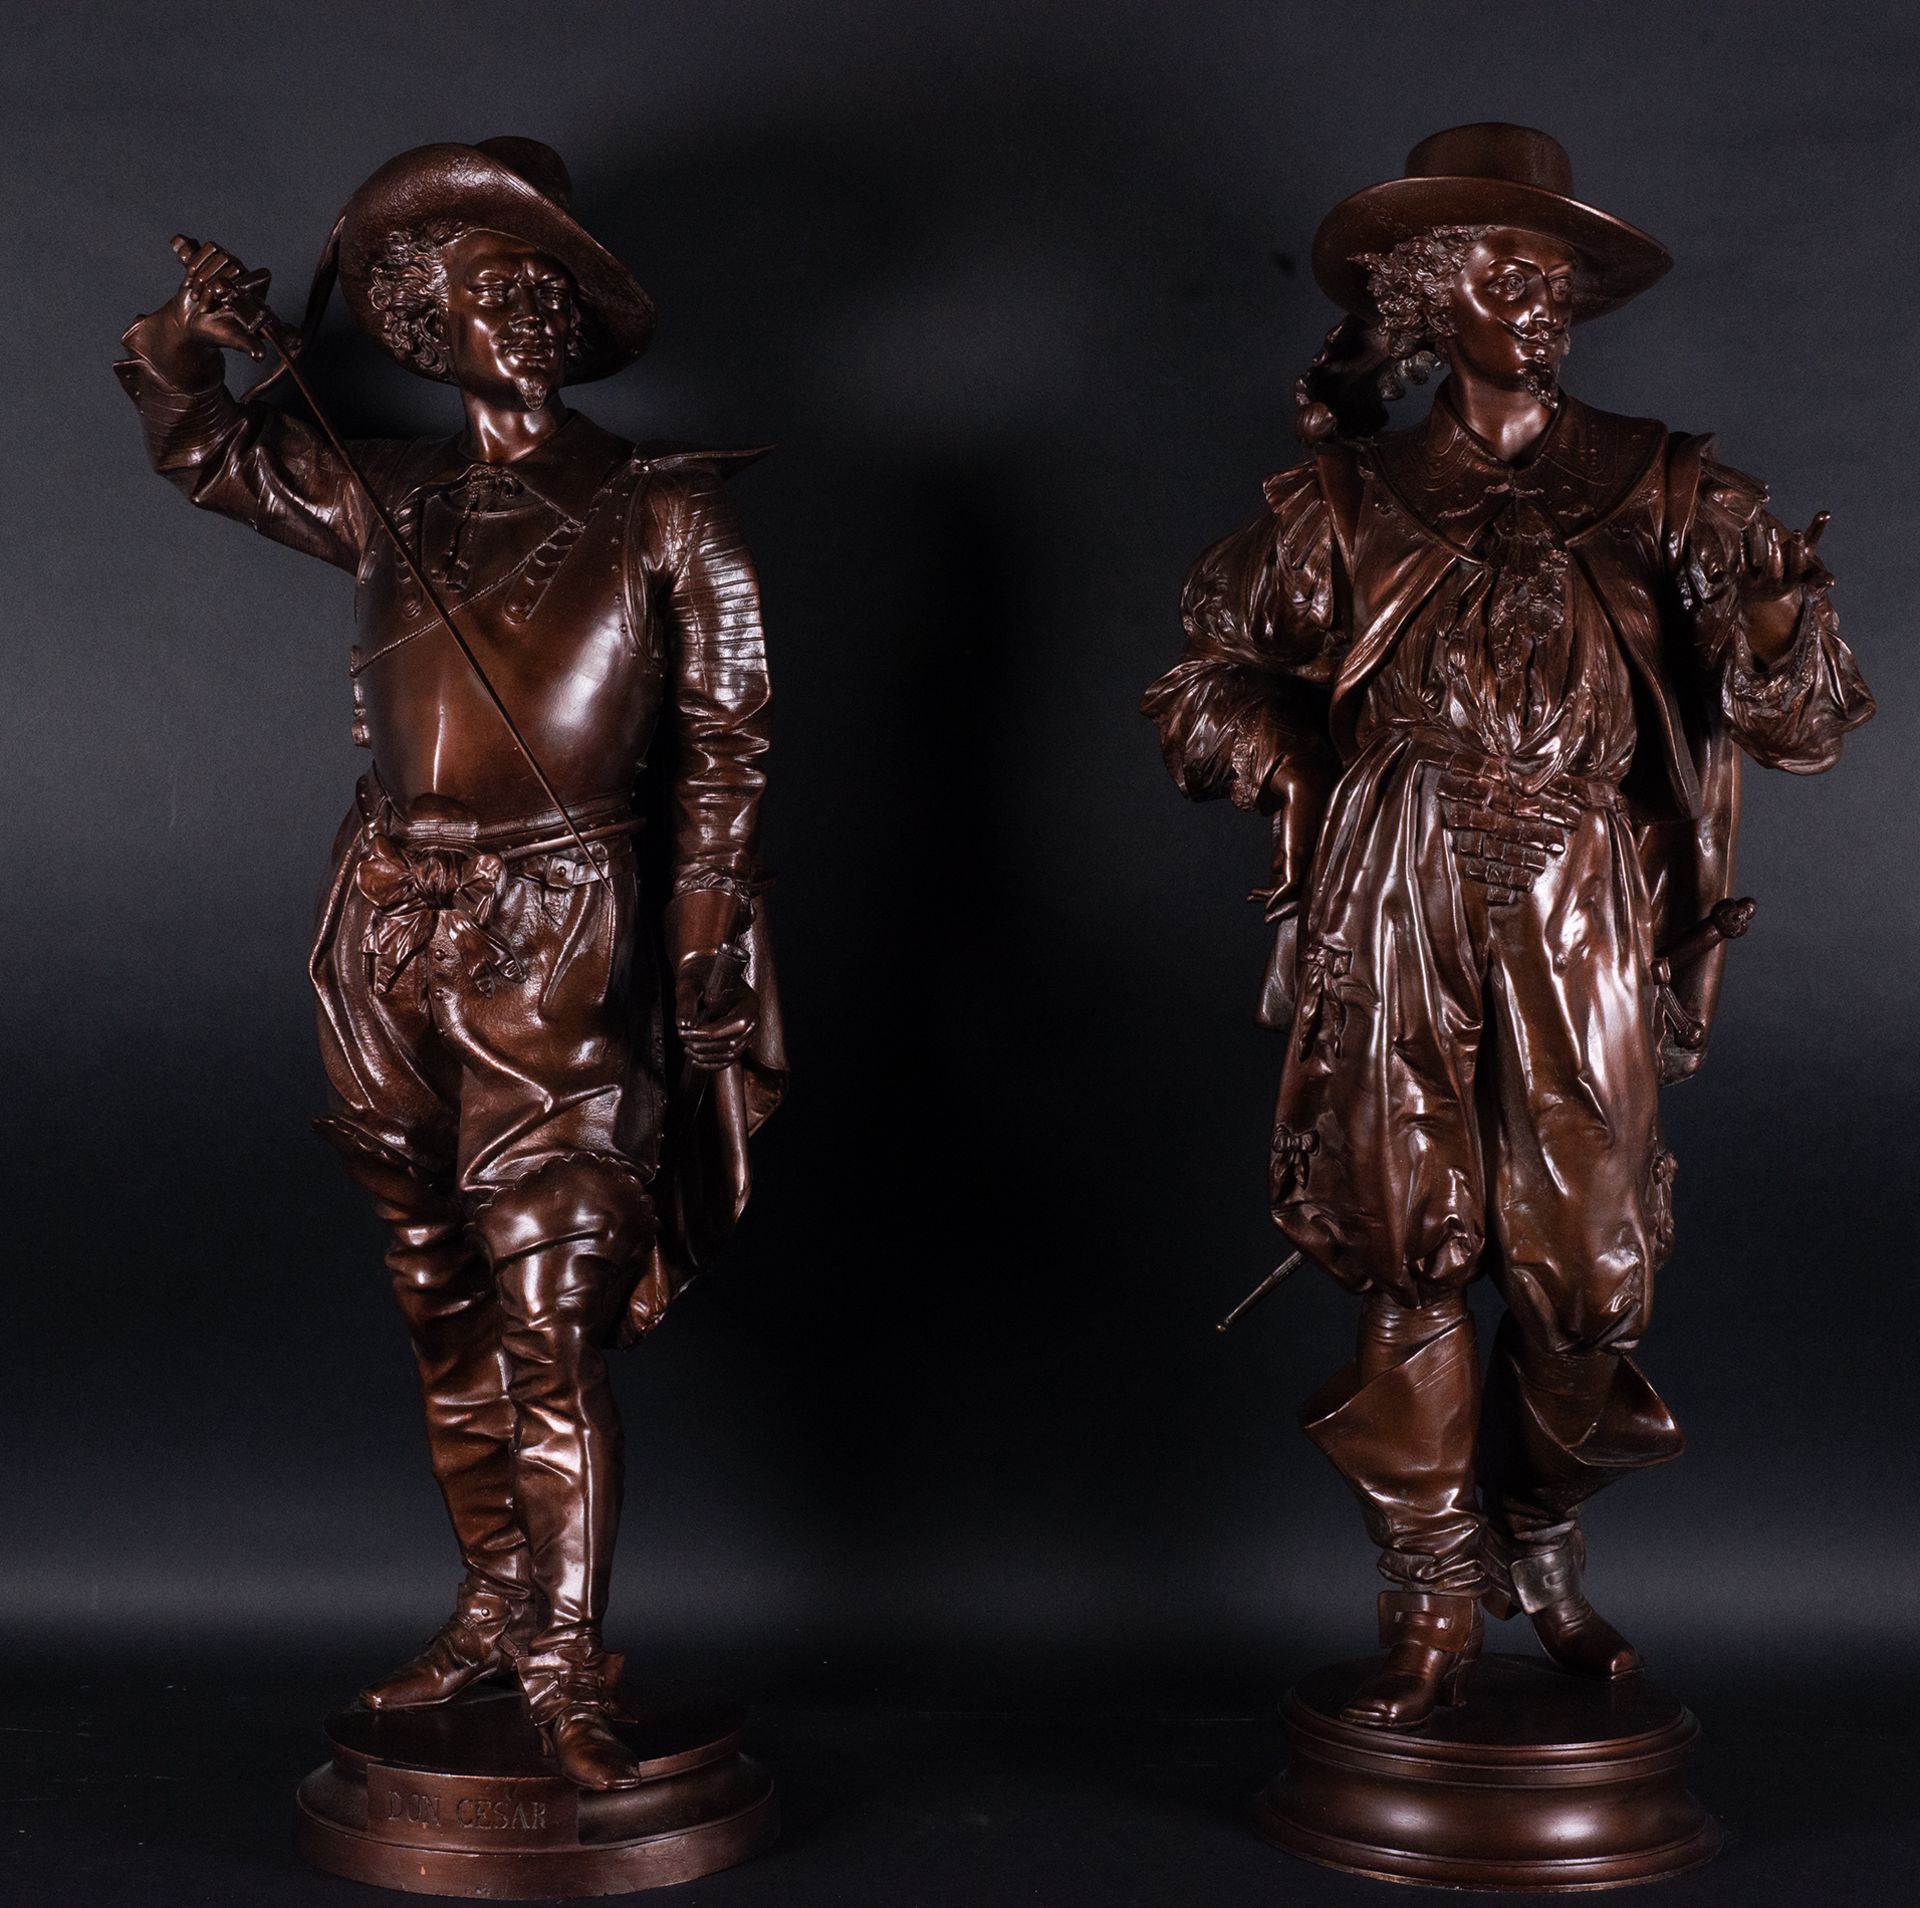 Pair of Great Musketeers in calamine, 19th-20th century